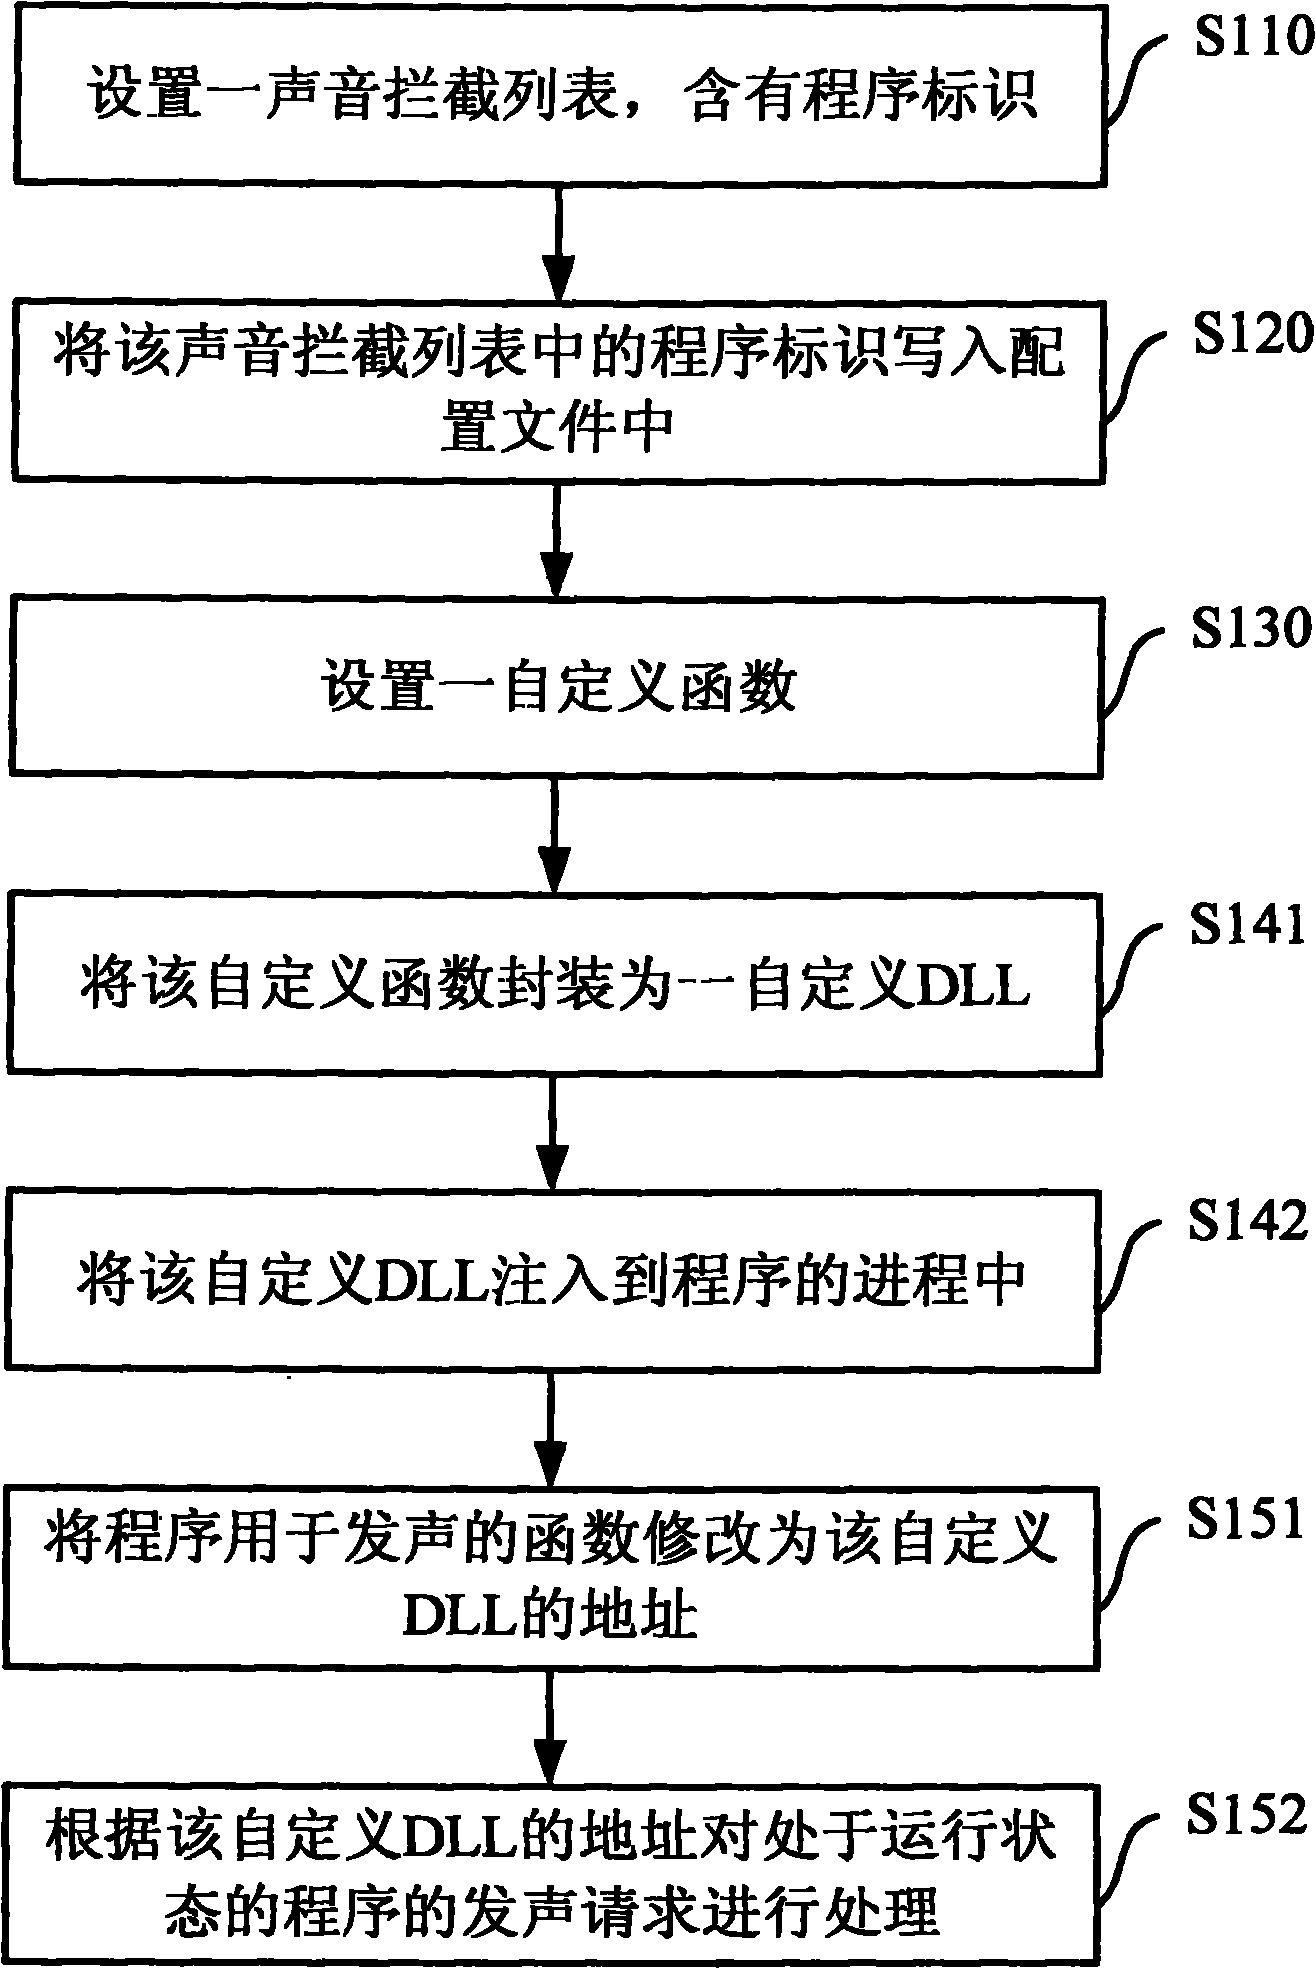 Sound management module and method for data processing equipment